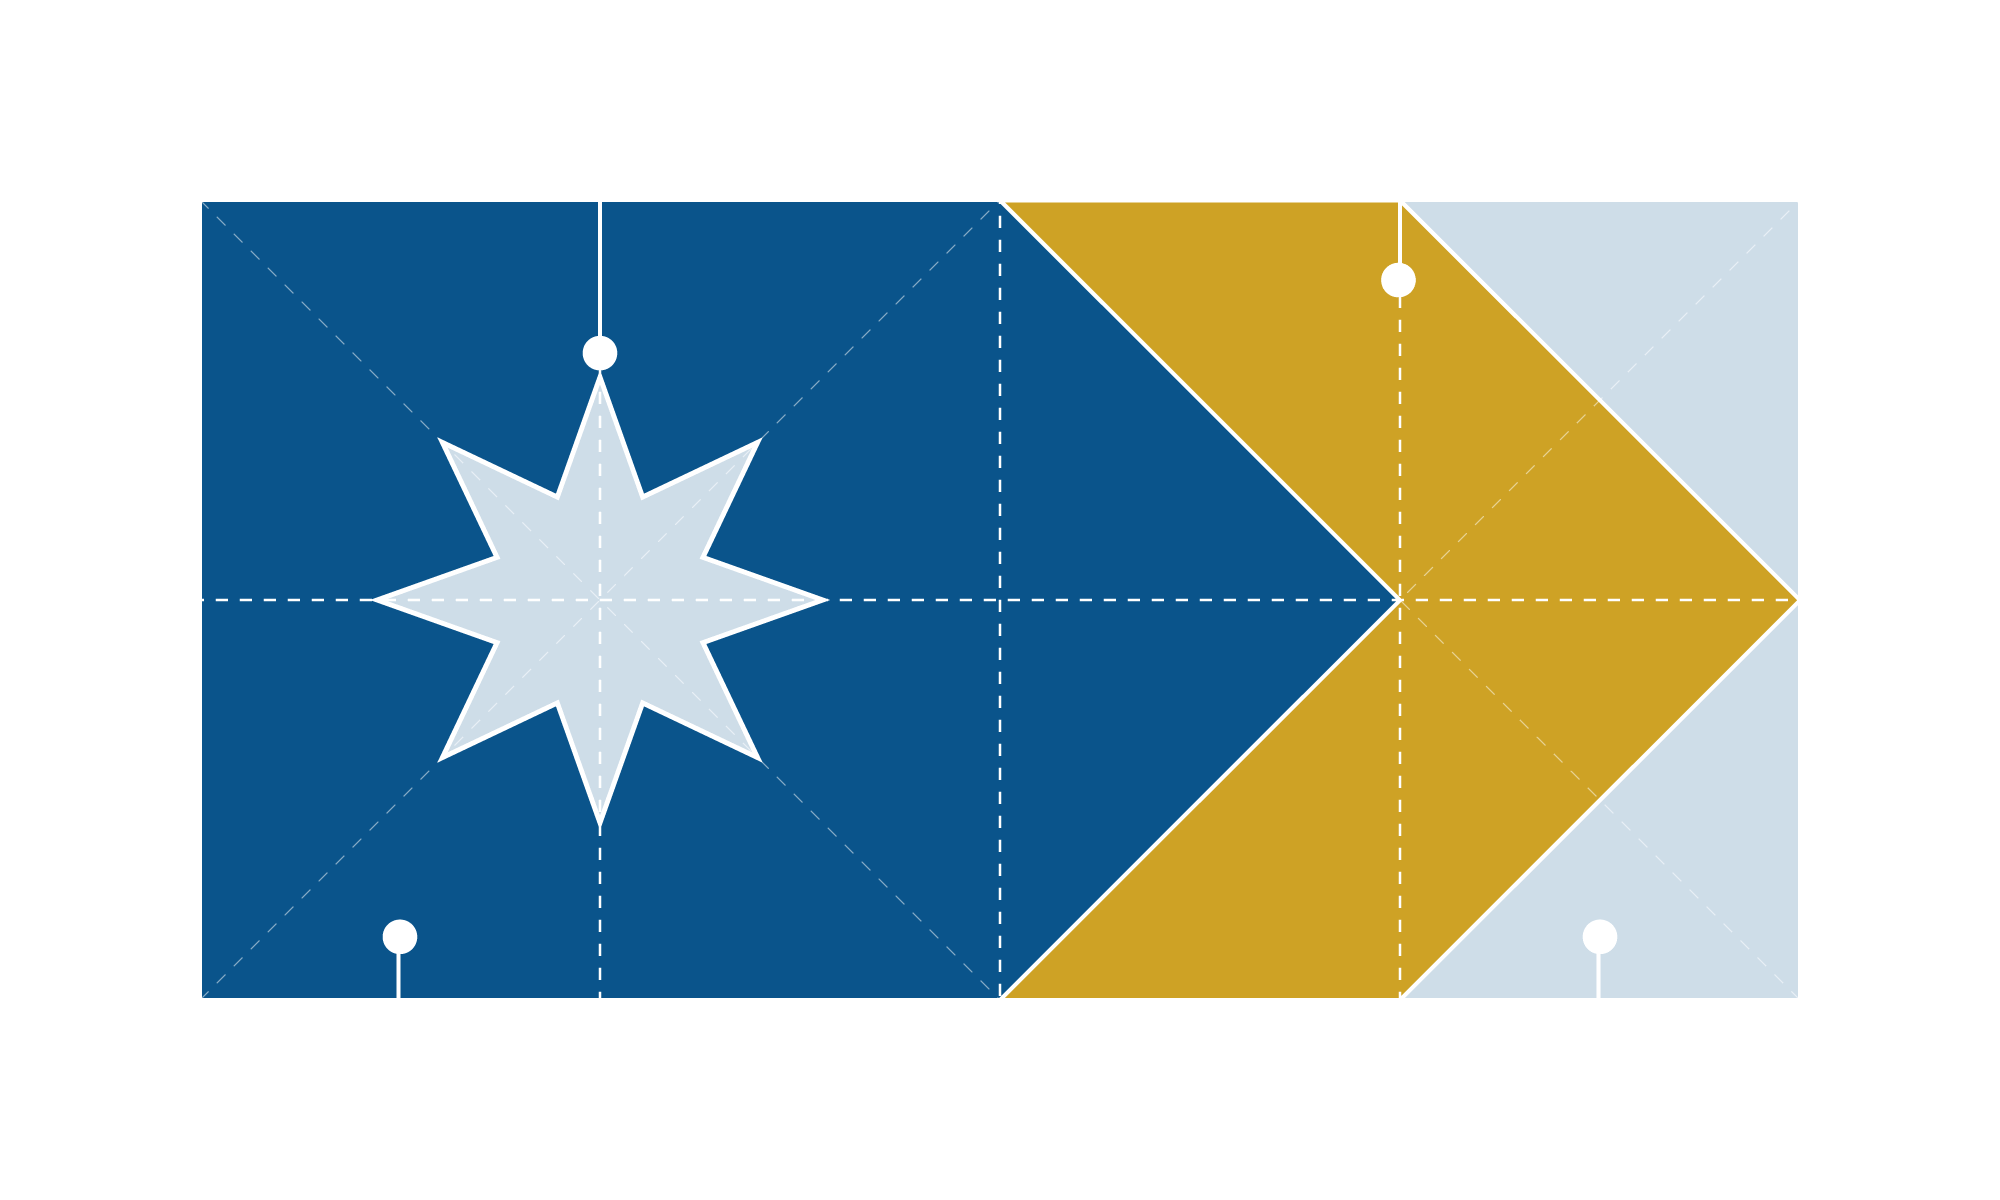 A federation star on our starry blue night, to reflect our rich history. A golden chevron / boomerang points towards the fly. In the corners, bright light to symbolise the daybreak, our future.